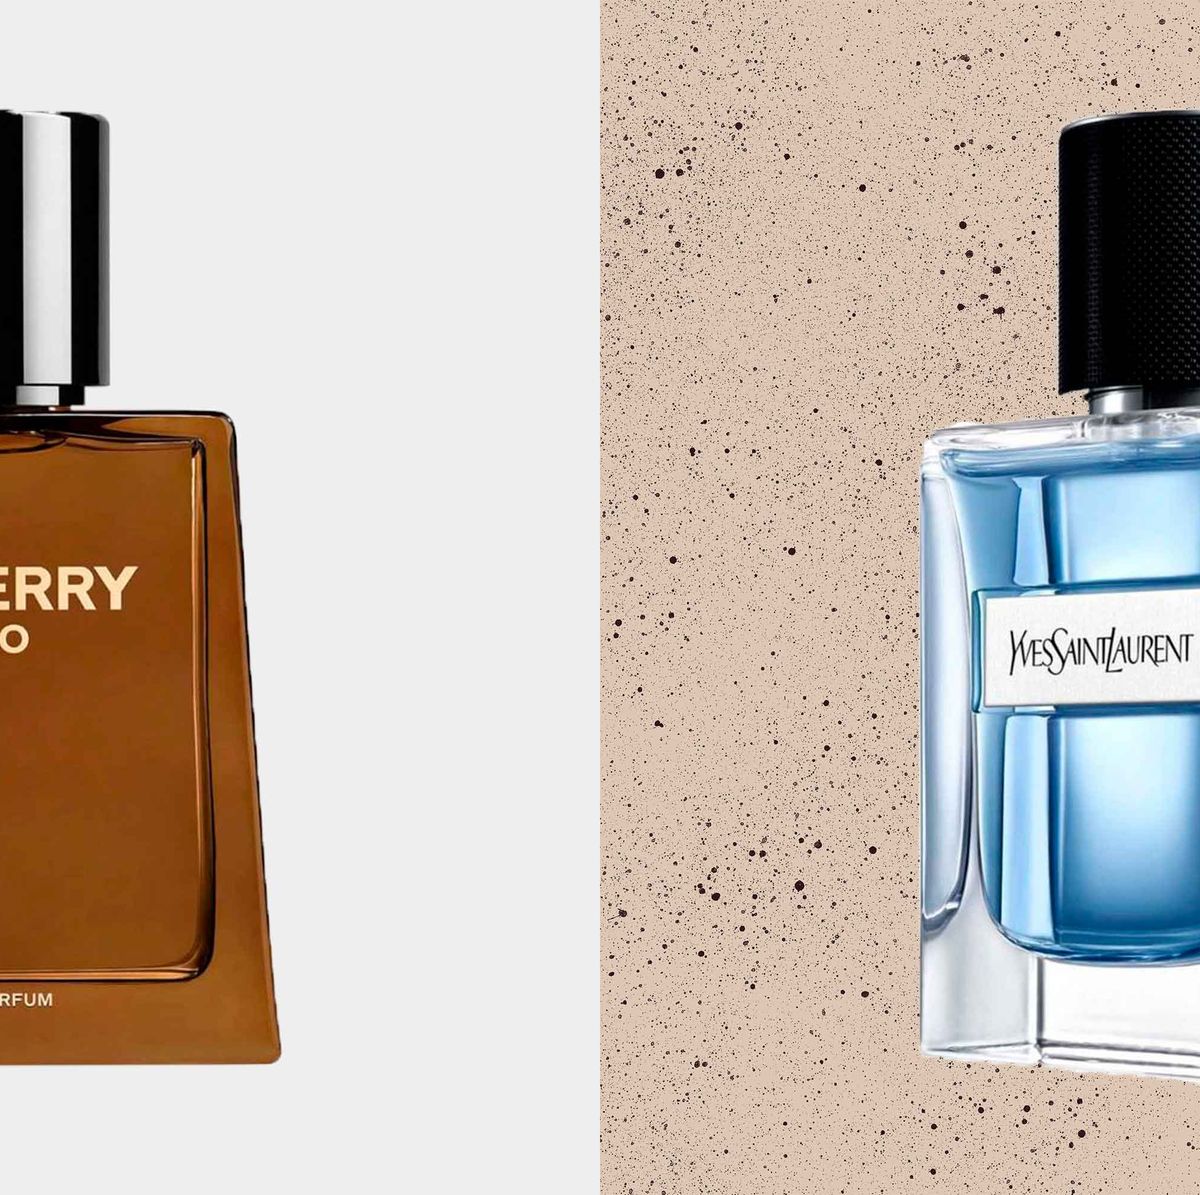 Louis Vuitton launches its first men's fragrance range, bottled by